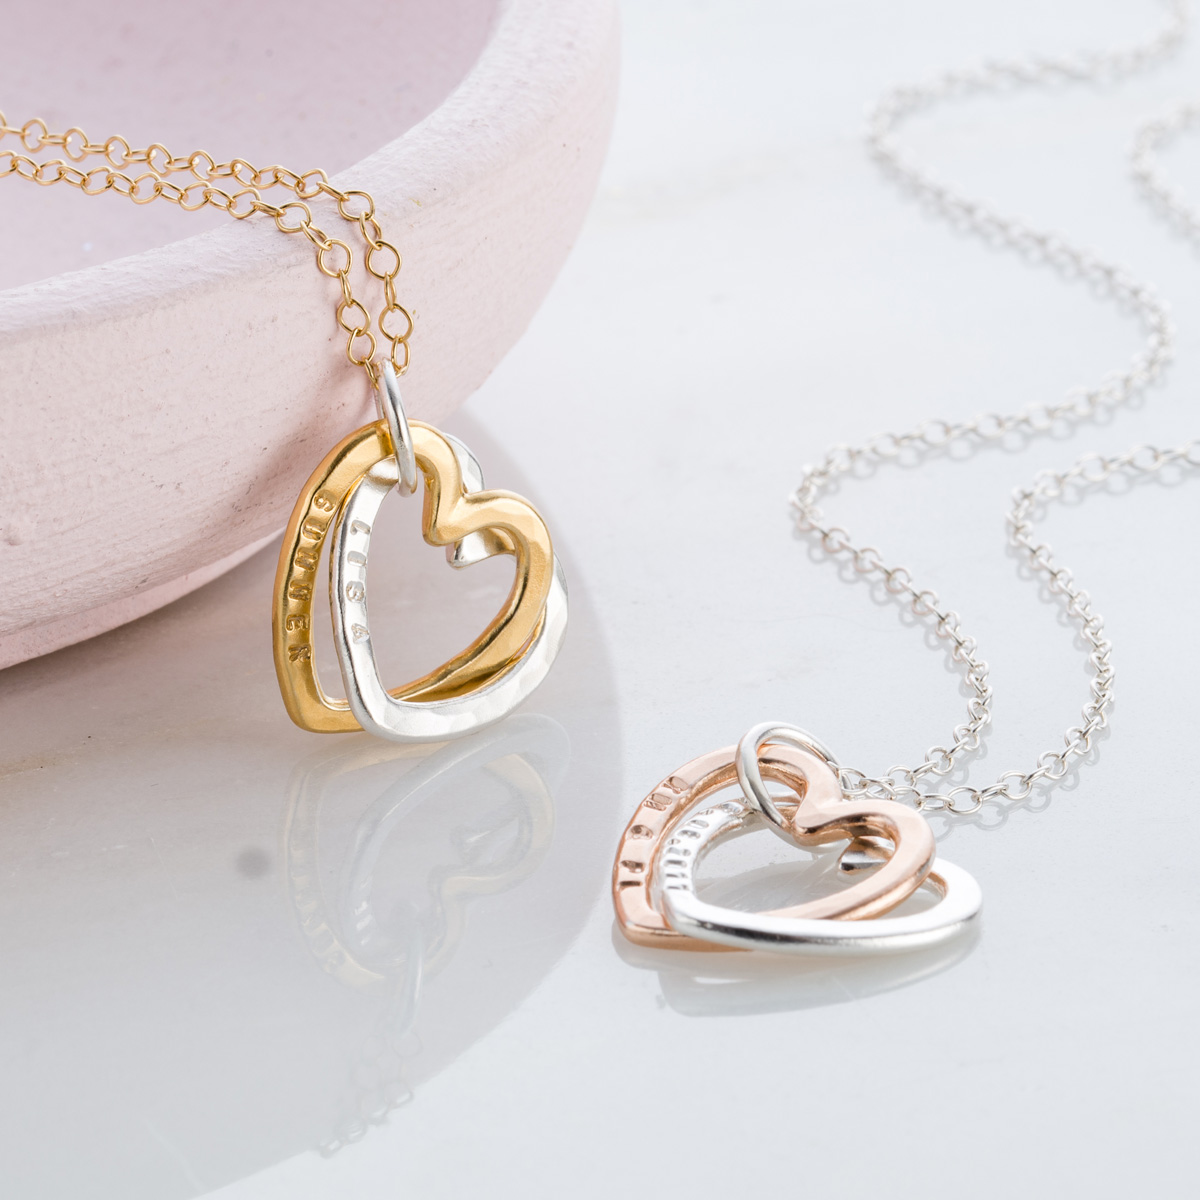 Personalised Posh Totty Designs Interlinking Hearts Necklace With Gold